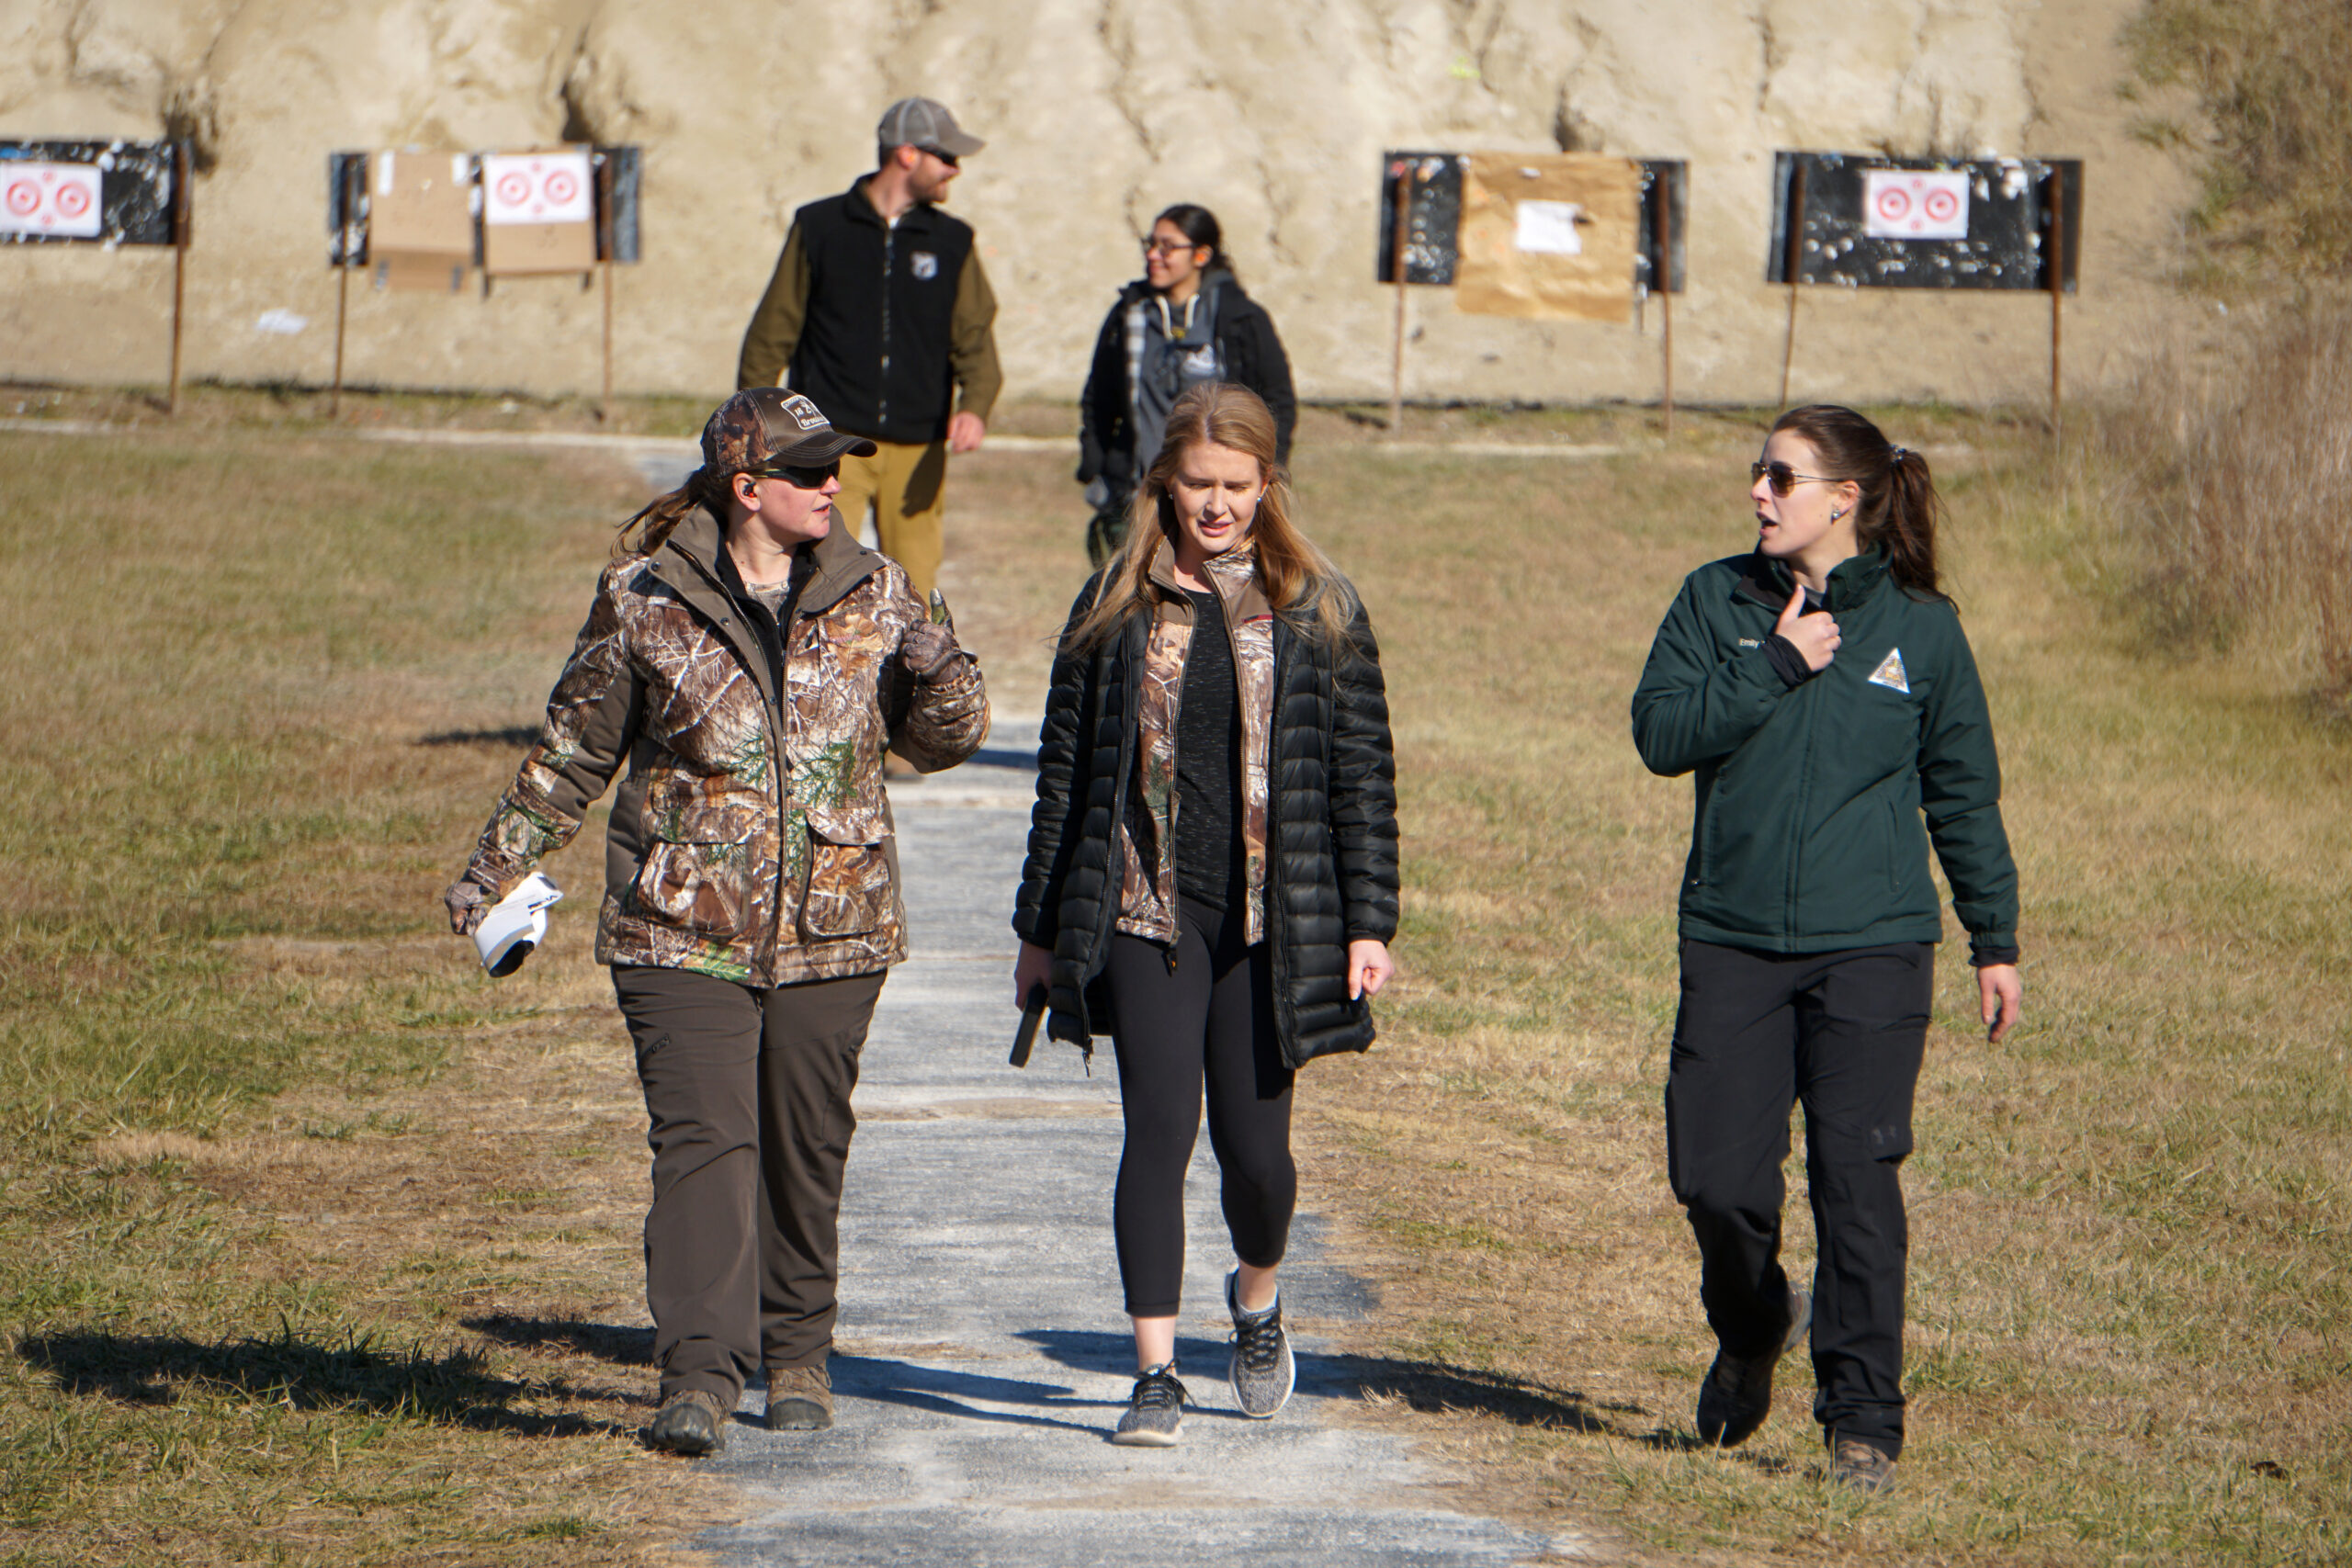 A group of women walking back from checking targets at the shooting range.